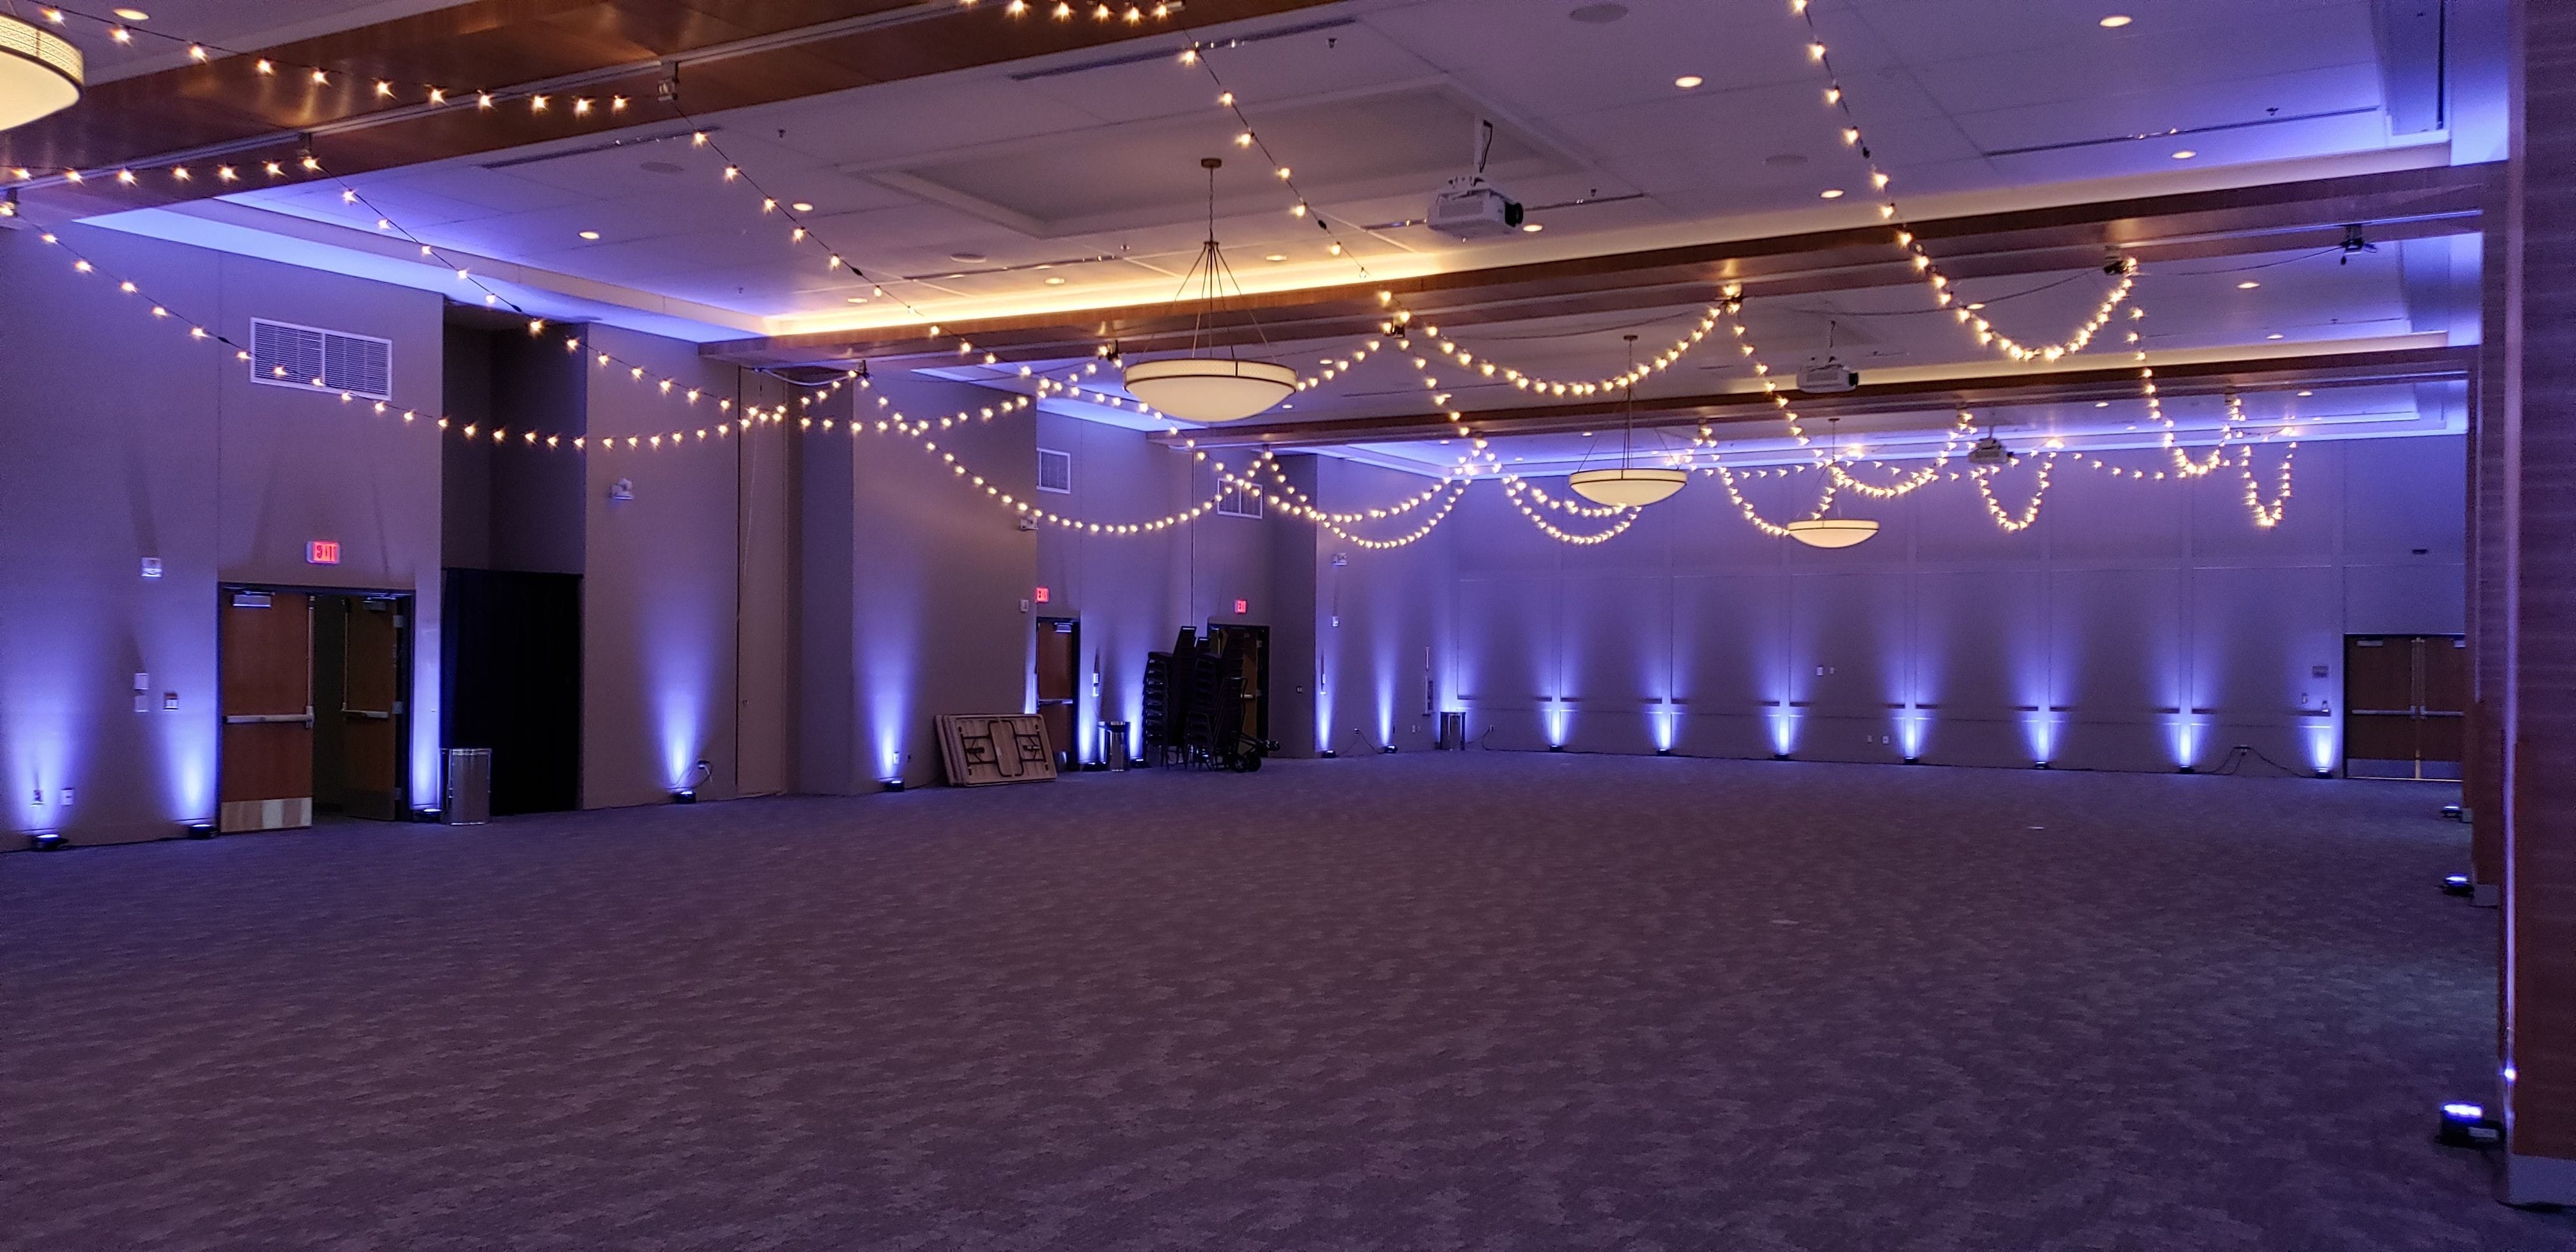 Wedding lighting at the Iron Trail Motors Event Center by Duluth Event Lighting.